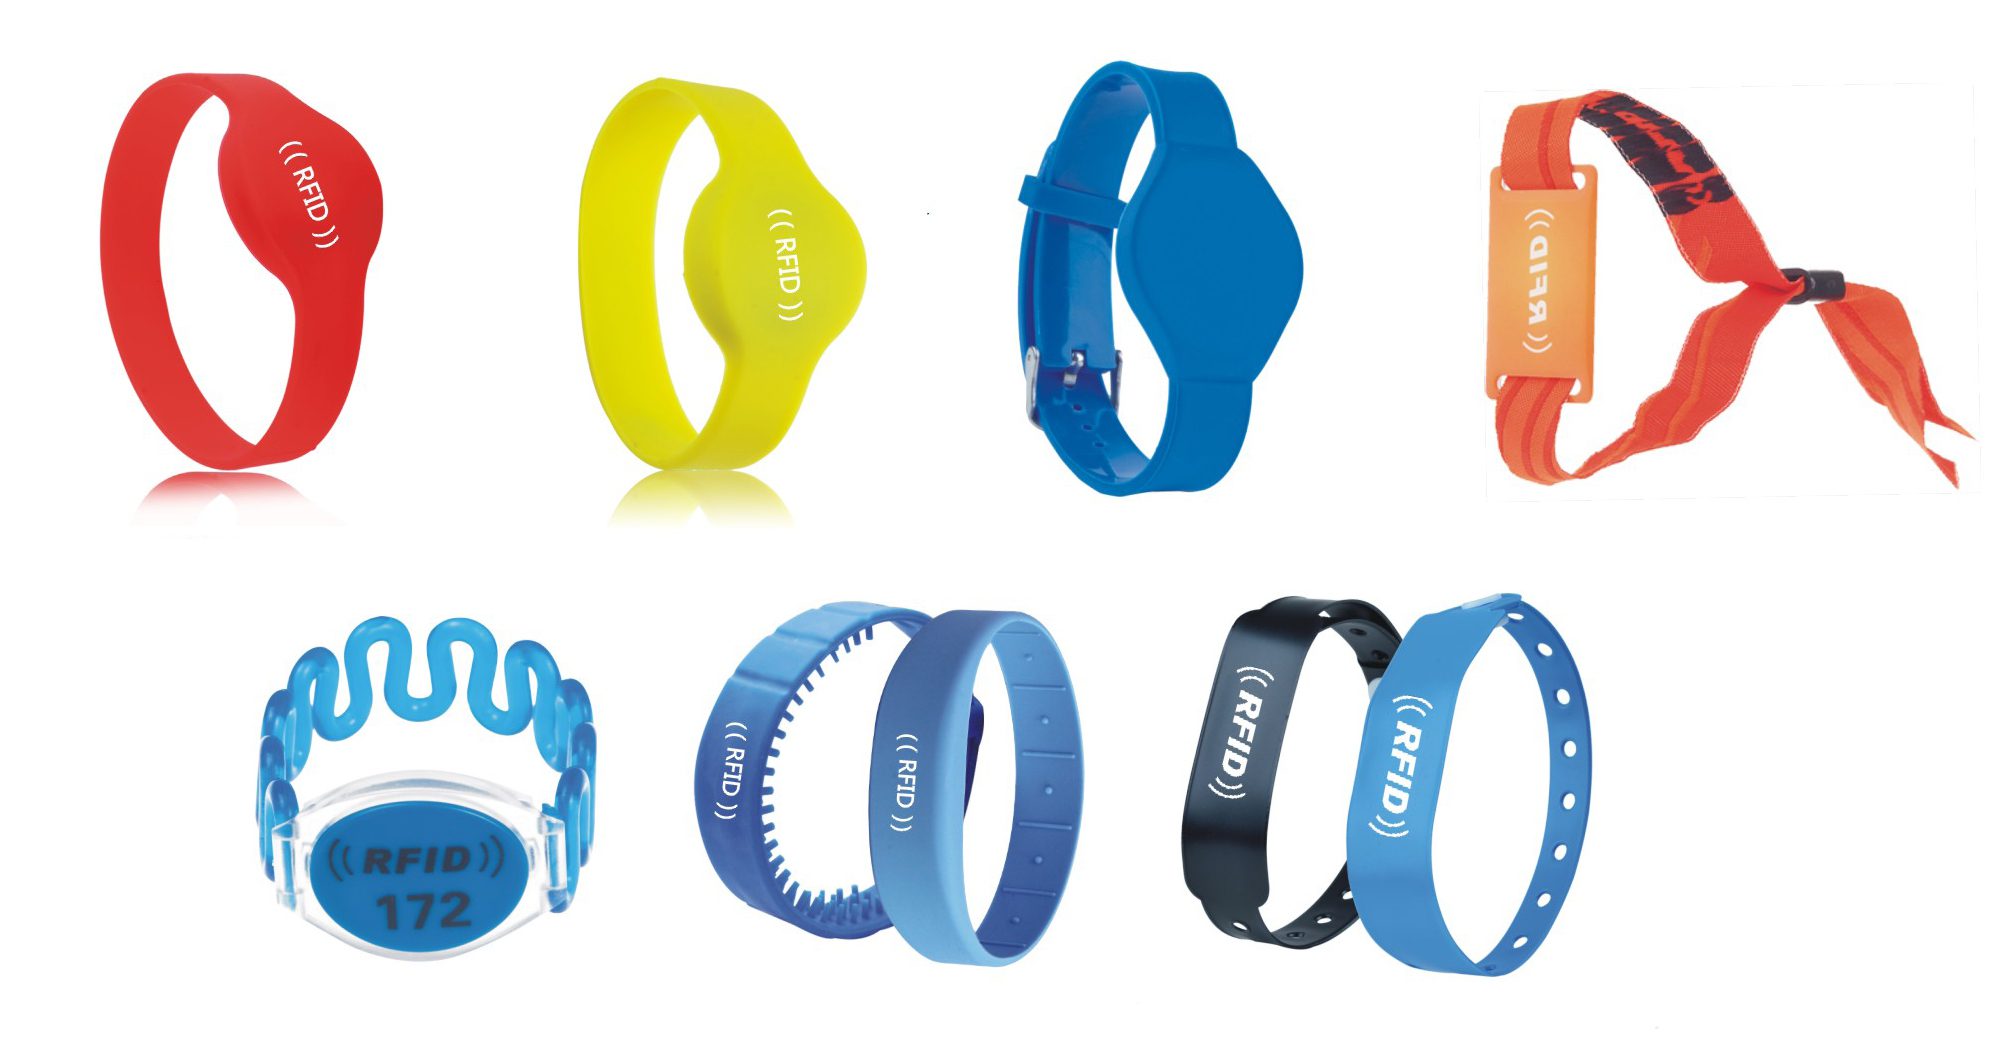 Featured image for “Pulseras RFID”